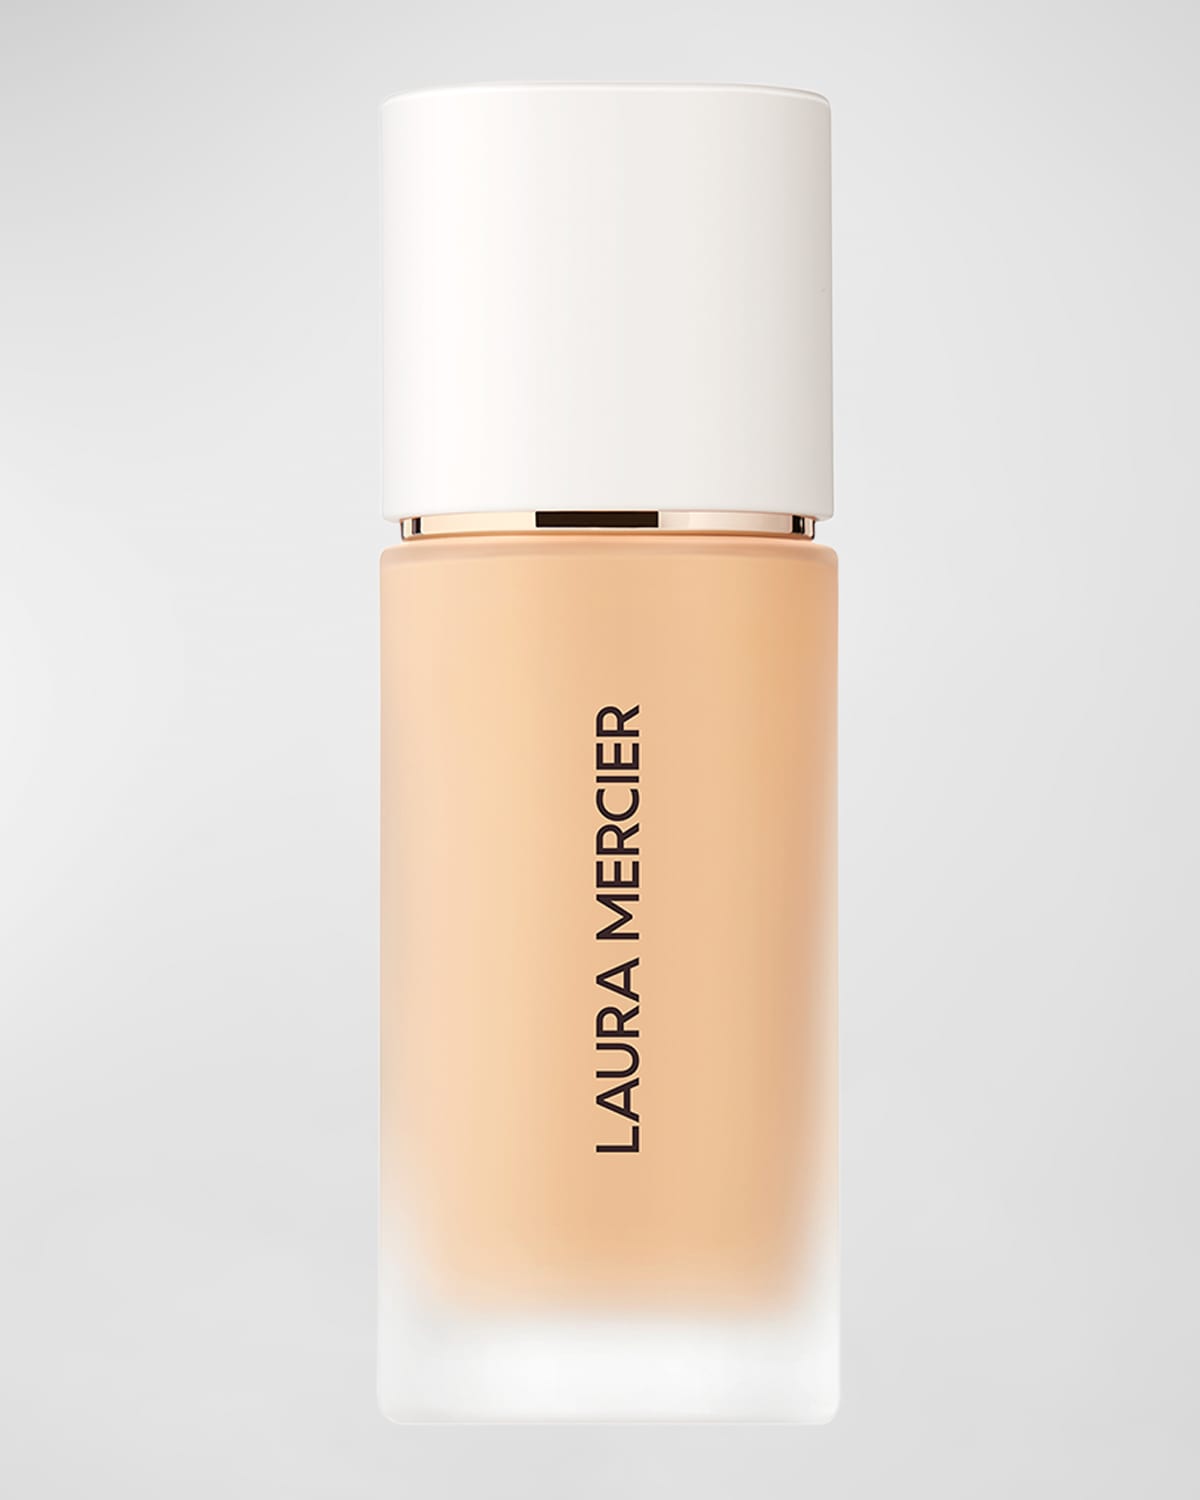 Shop Laura Mercier Real Flawless Weightless Perfecting Waterproof Foundation In 1w1 Cashmere